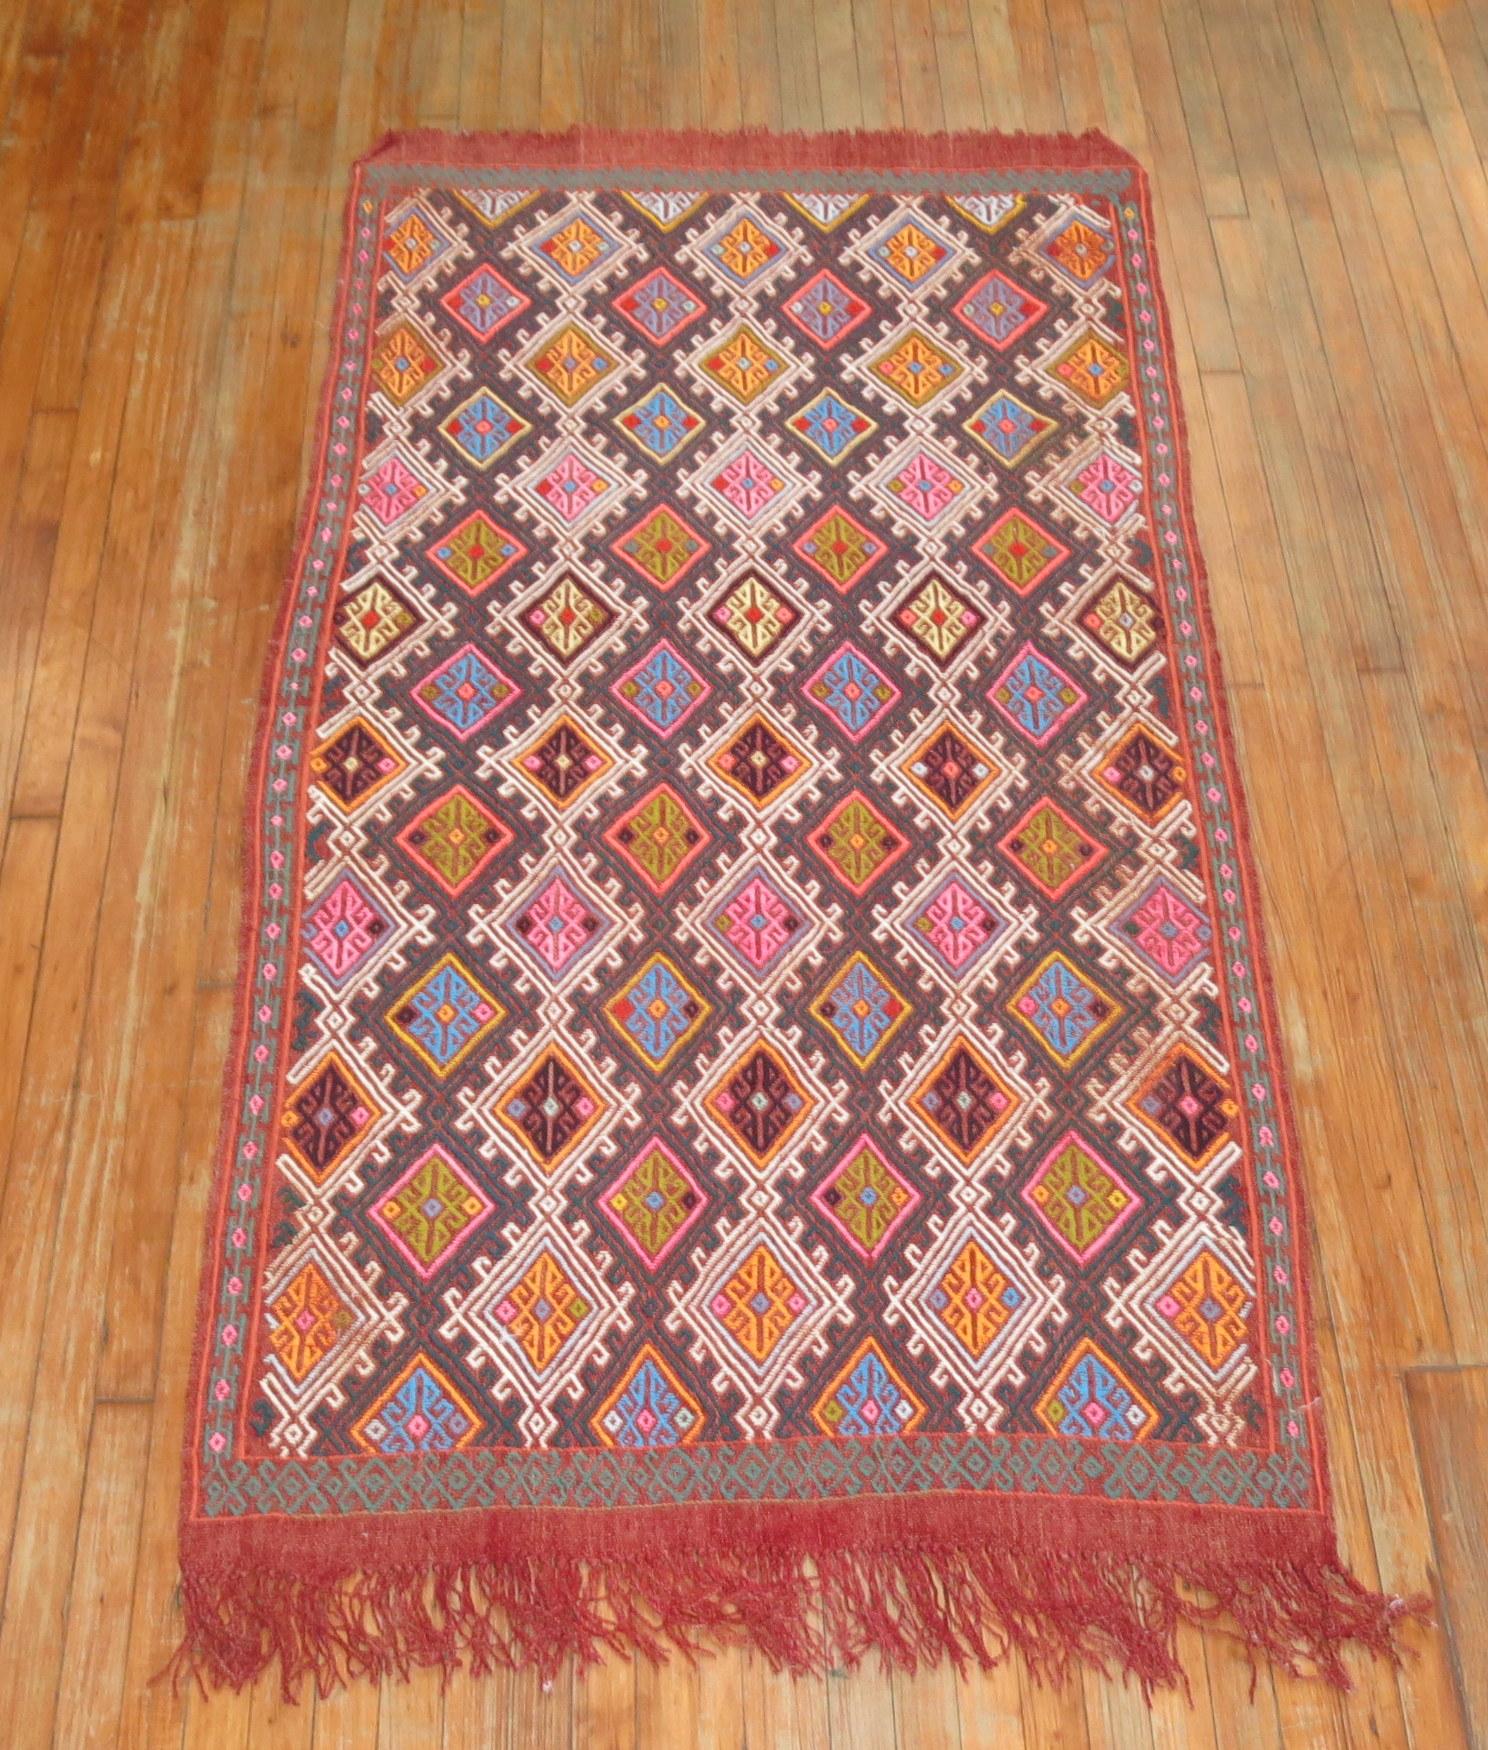 Geometric Colorful Jajim Flat-Weave, 20th Century In Good Condition For Sale In New York, NY